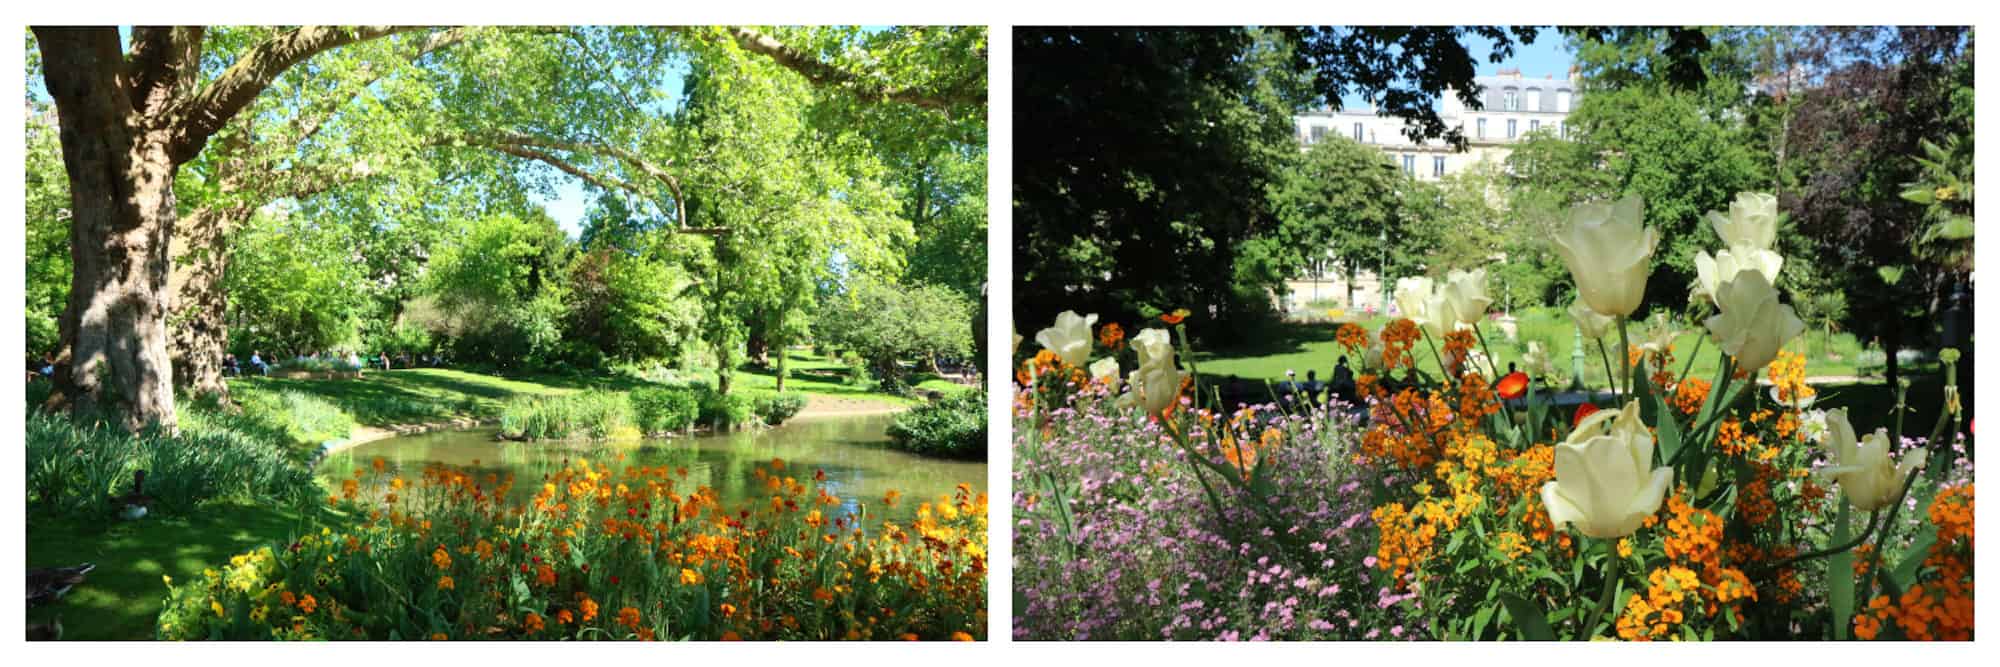 The idyllic Square des Batignolles park in Paris' 17th arrondissement with its pond and colorful flowers is the perfect summer spot in the city.